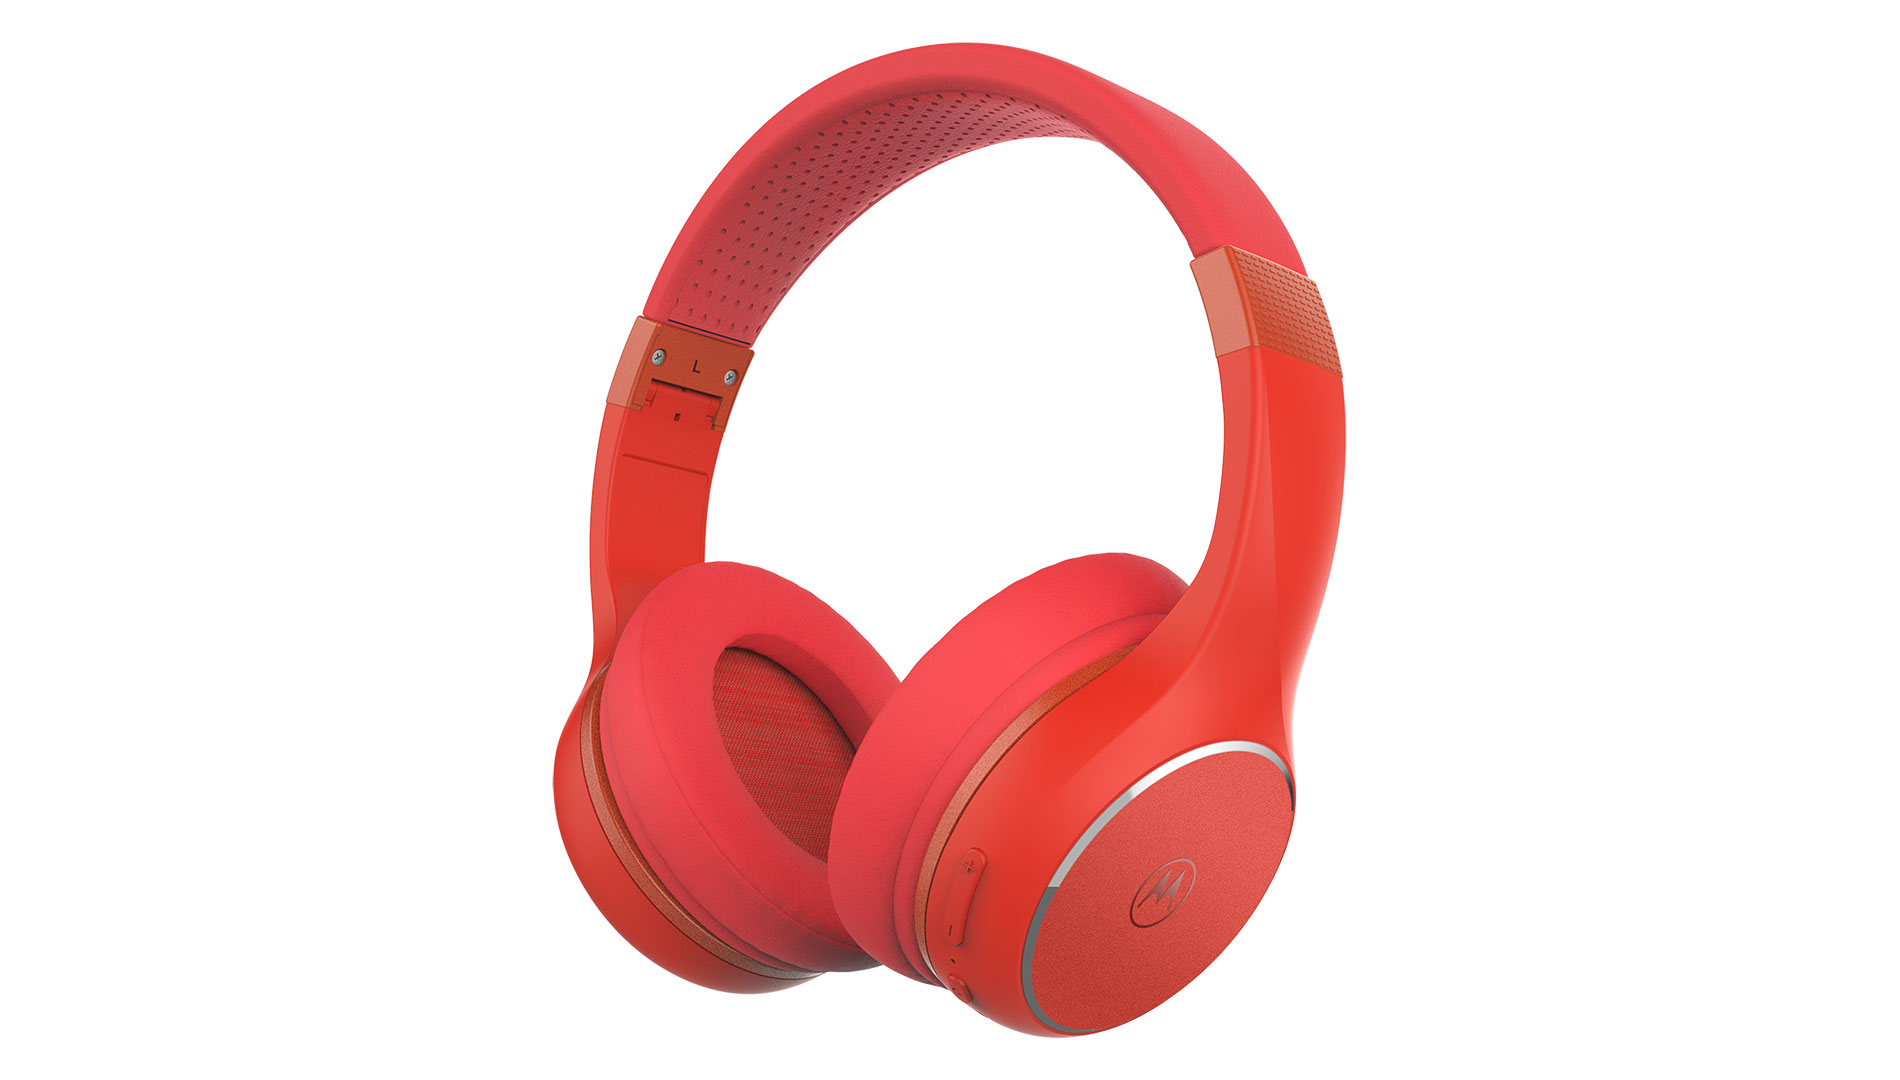 MOTO XT 220 Wireless over ear Headphones in red - Product image